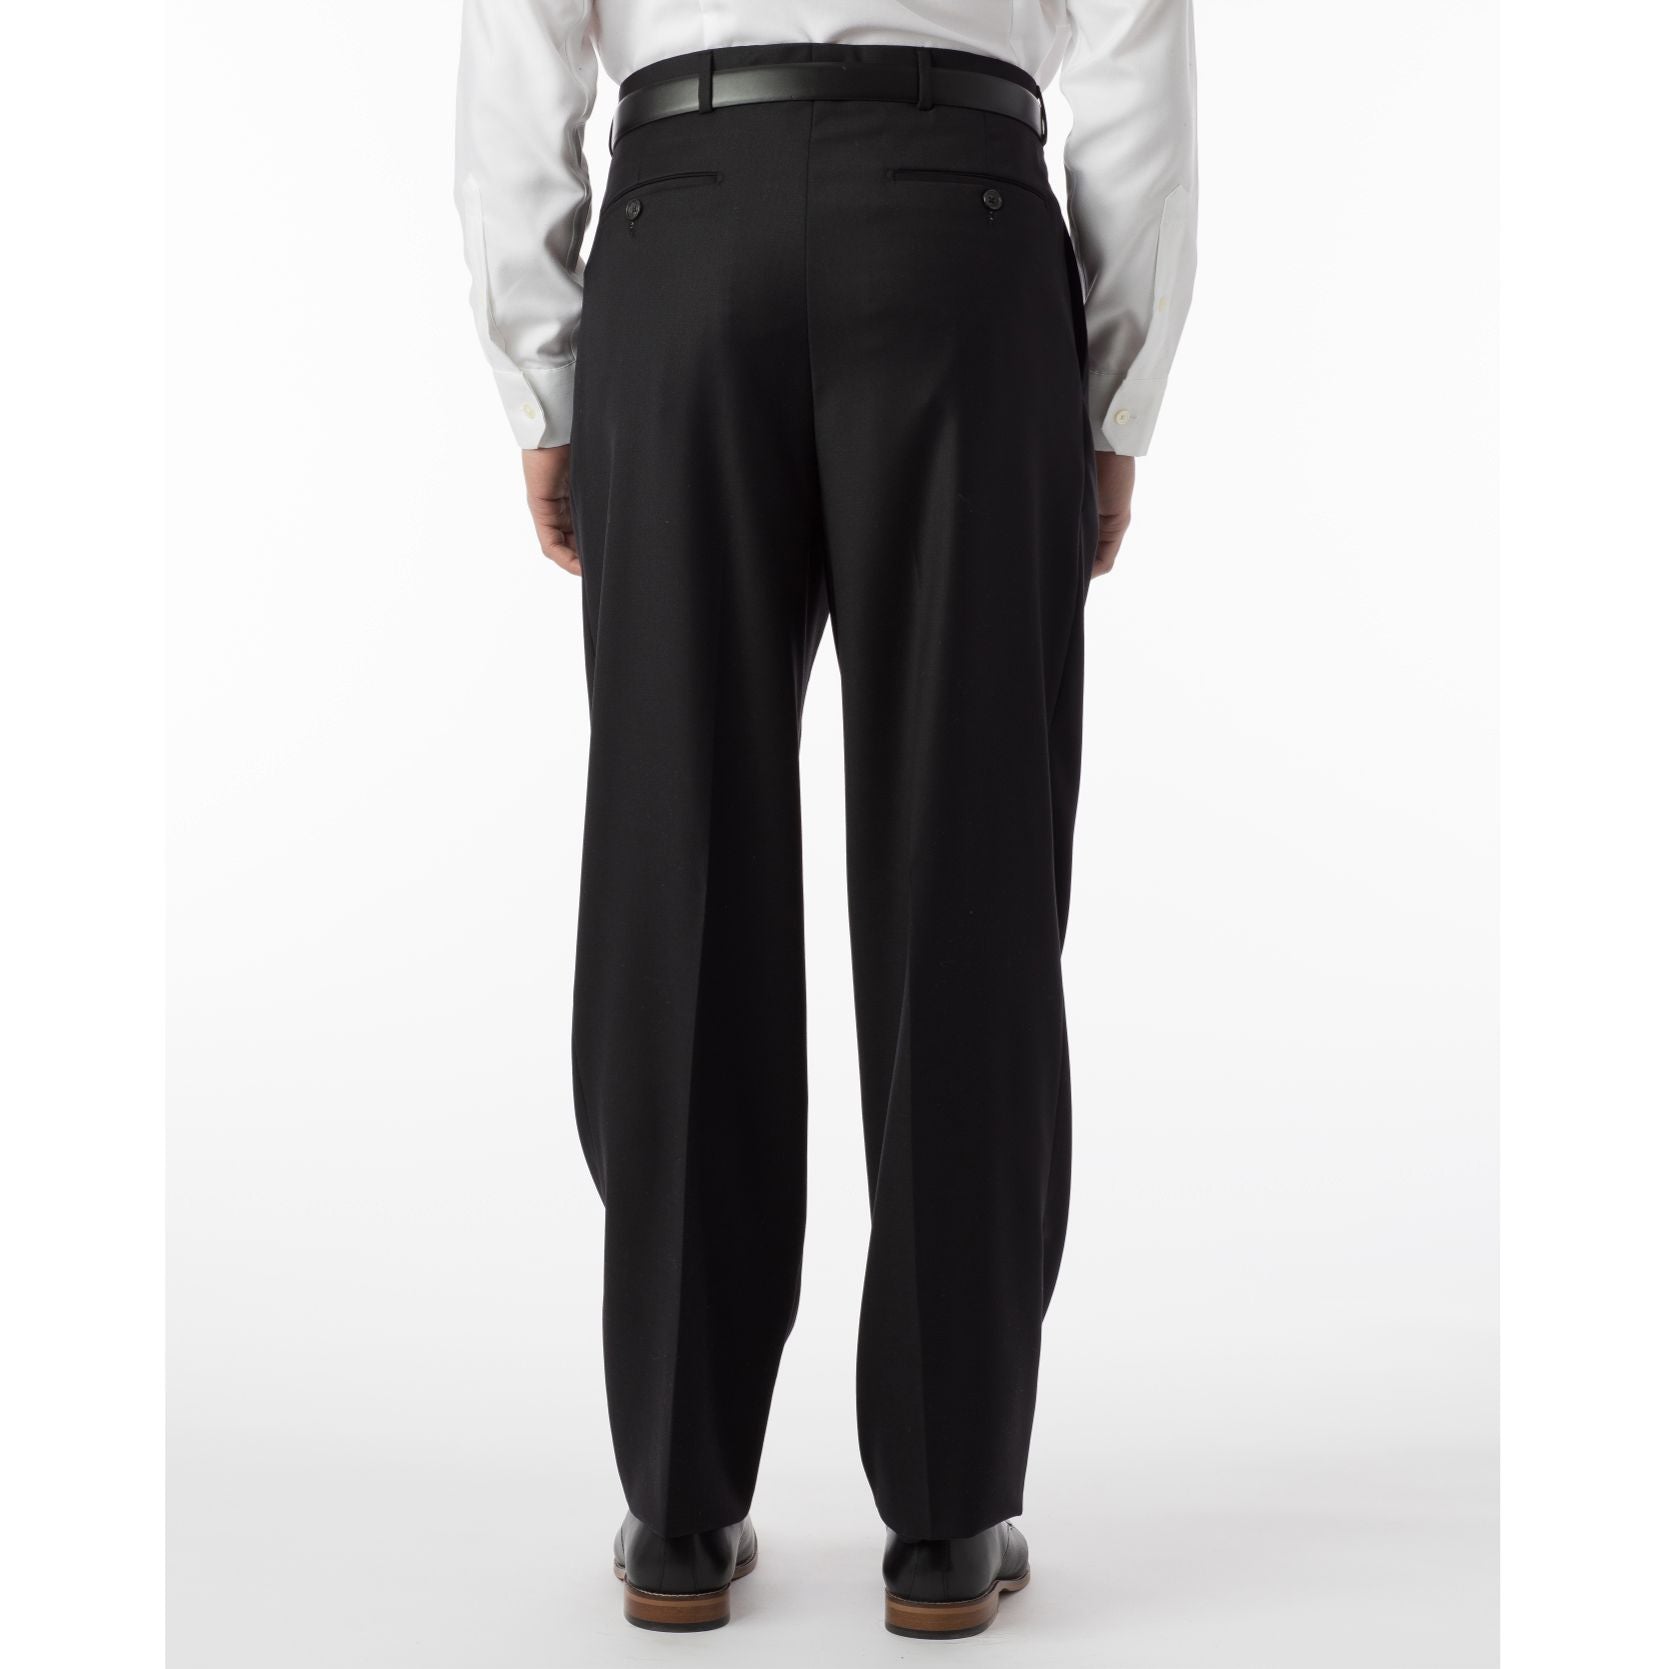 Super 120s Wool Travel Twill Comfort-EZE Trouser in Black (Manchester Pleated Model) by Ballin